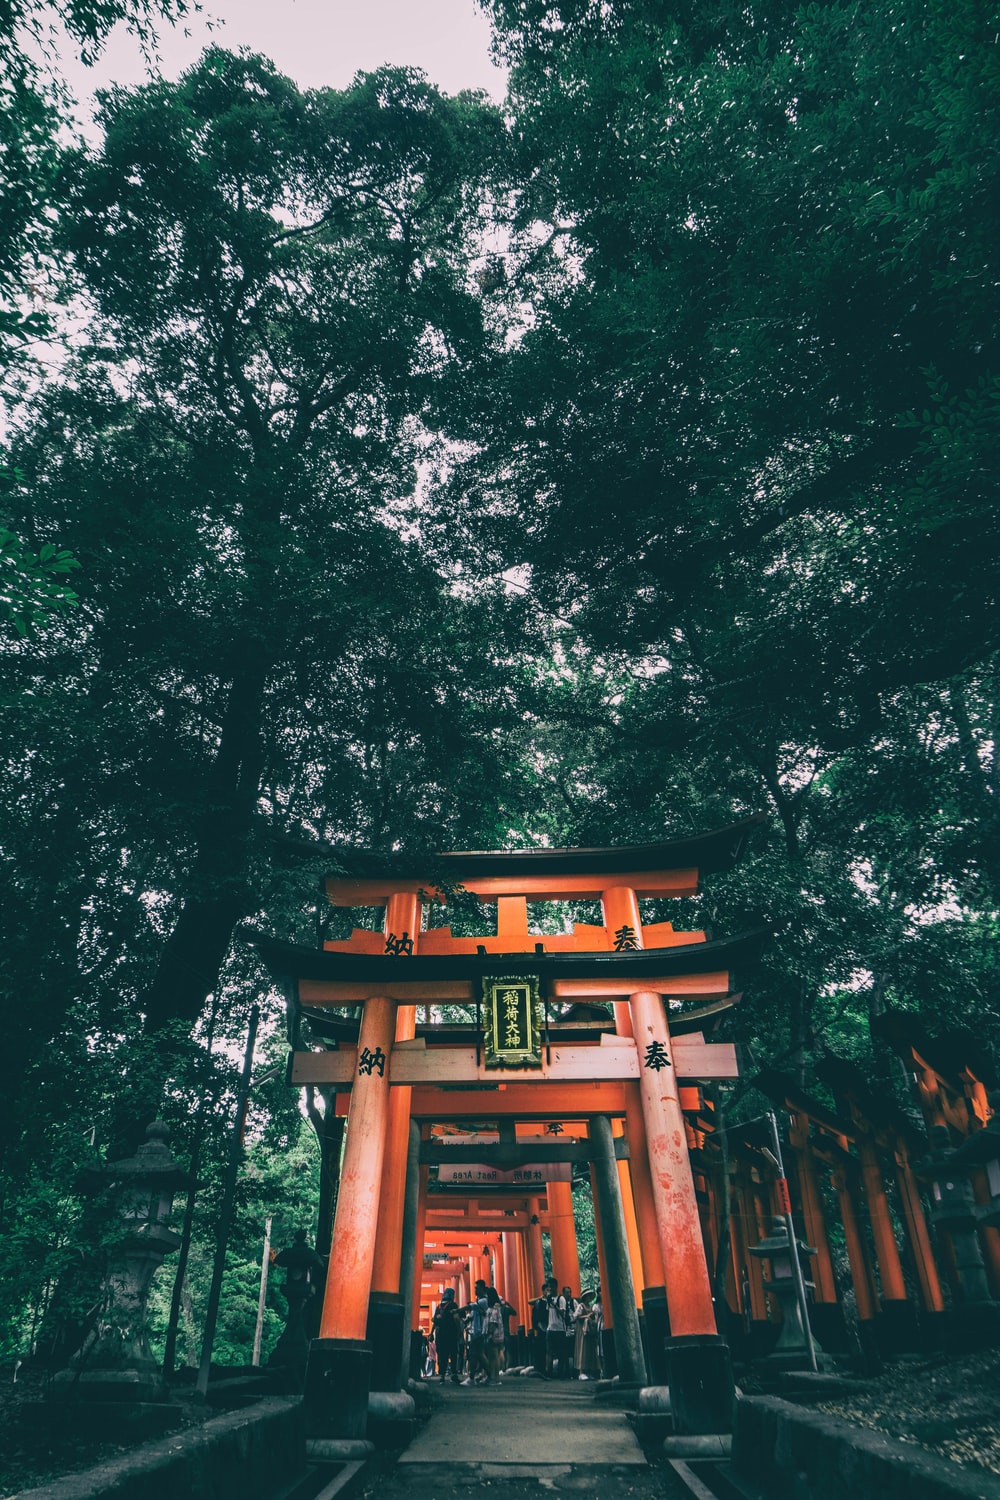 Japanese Gate Picture. Download Free Image